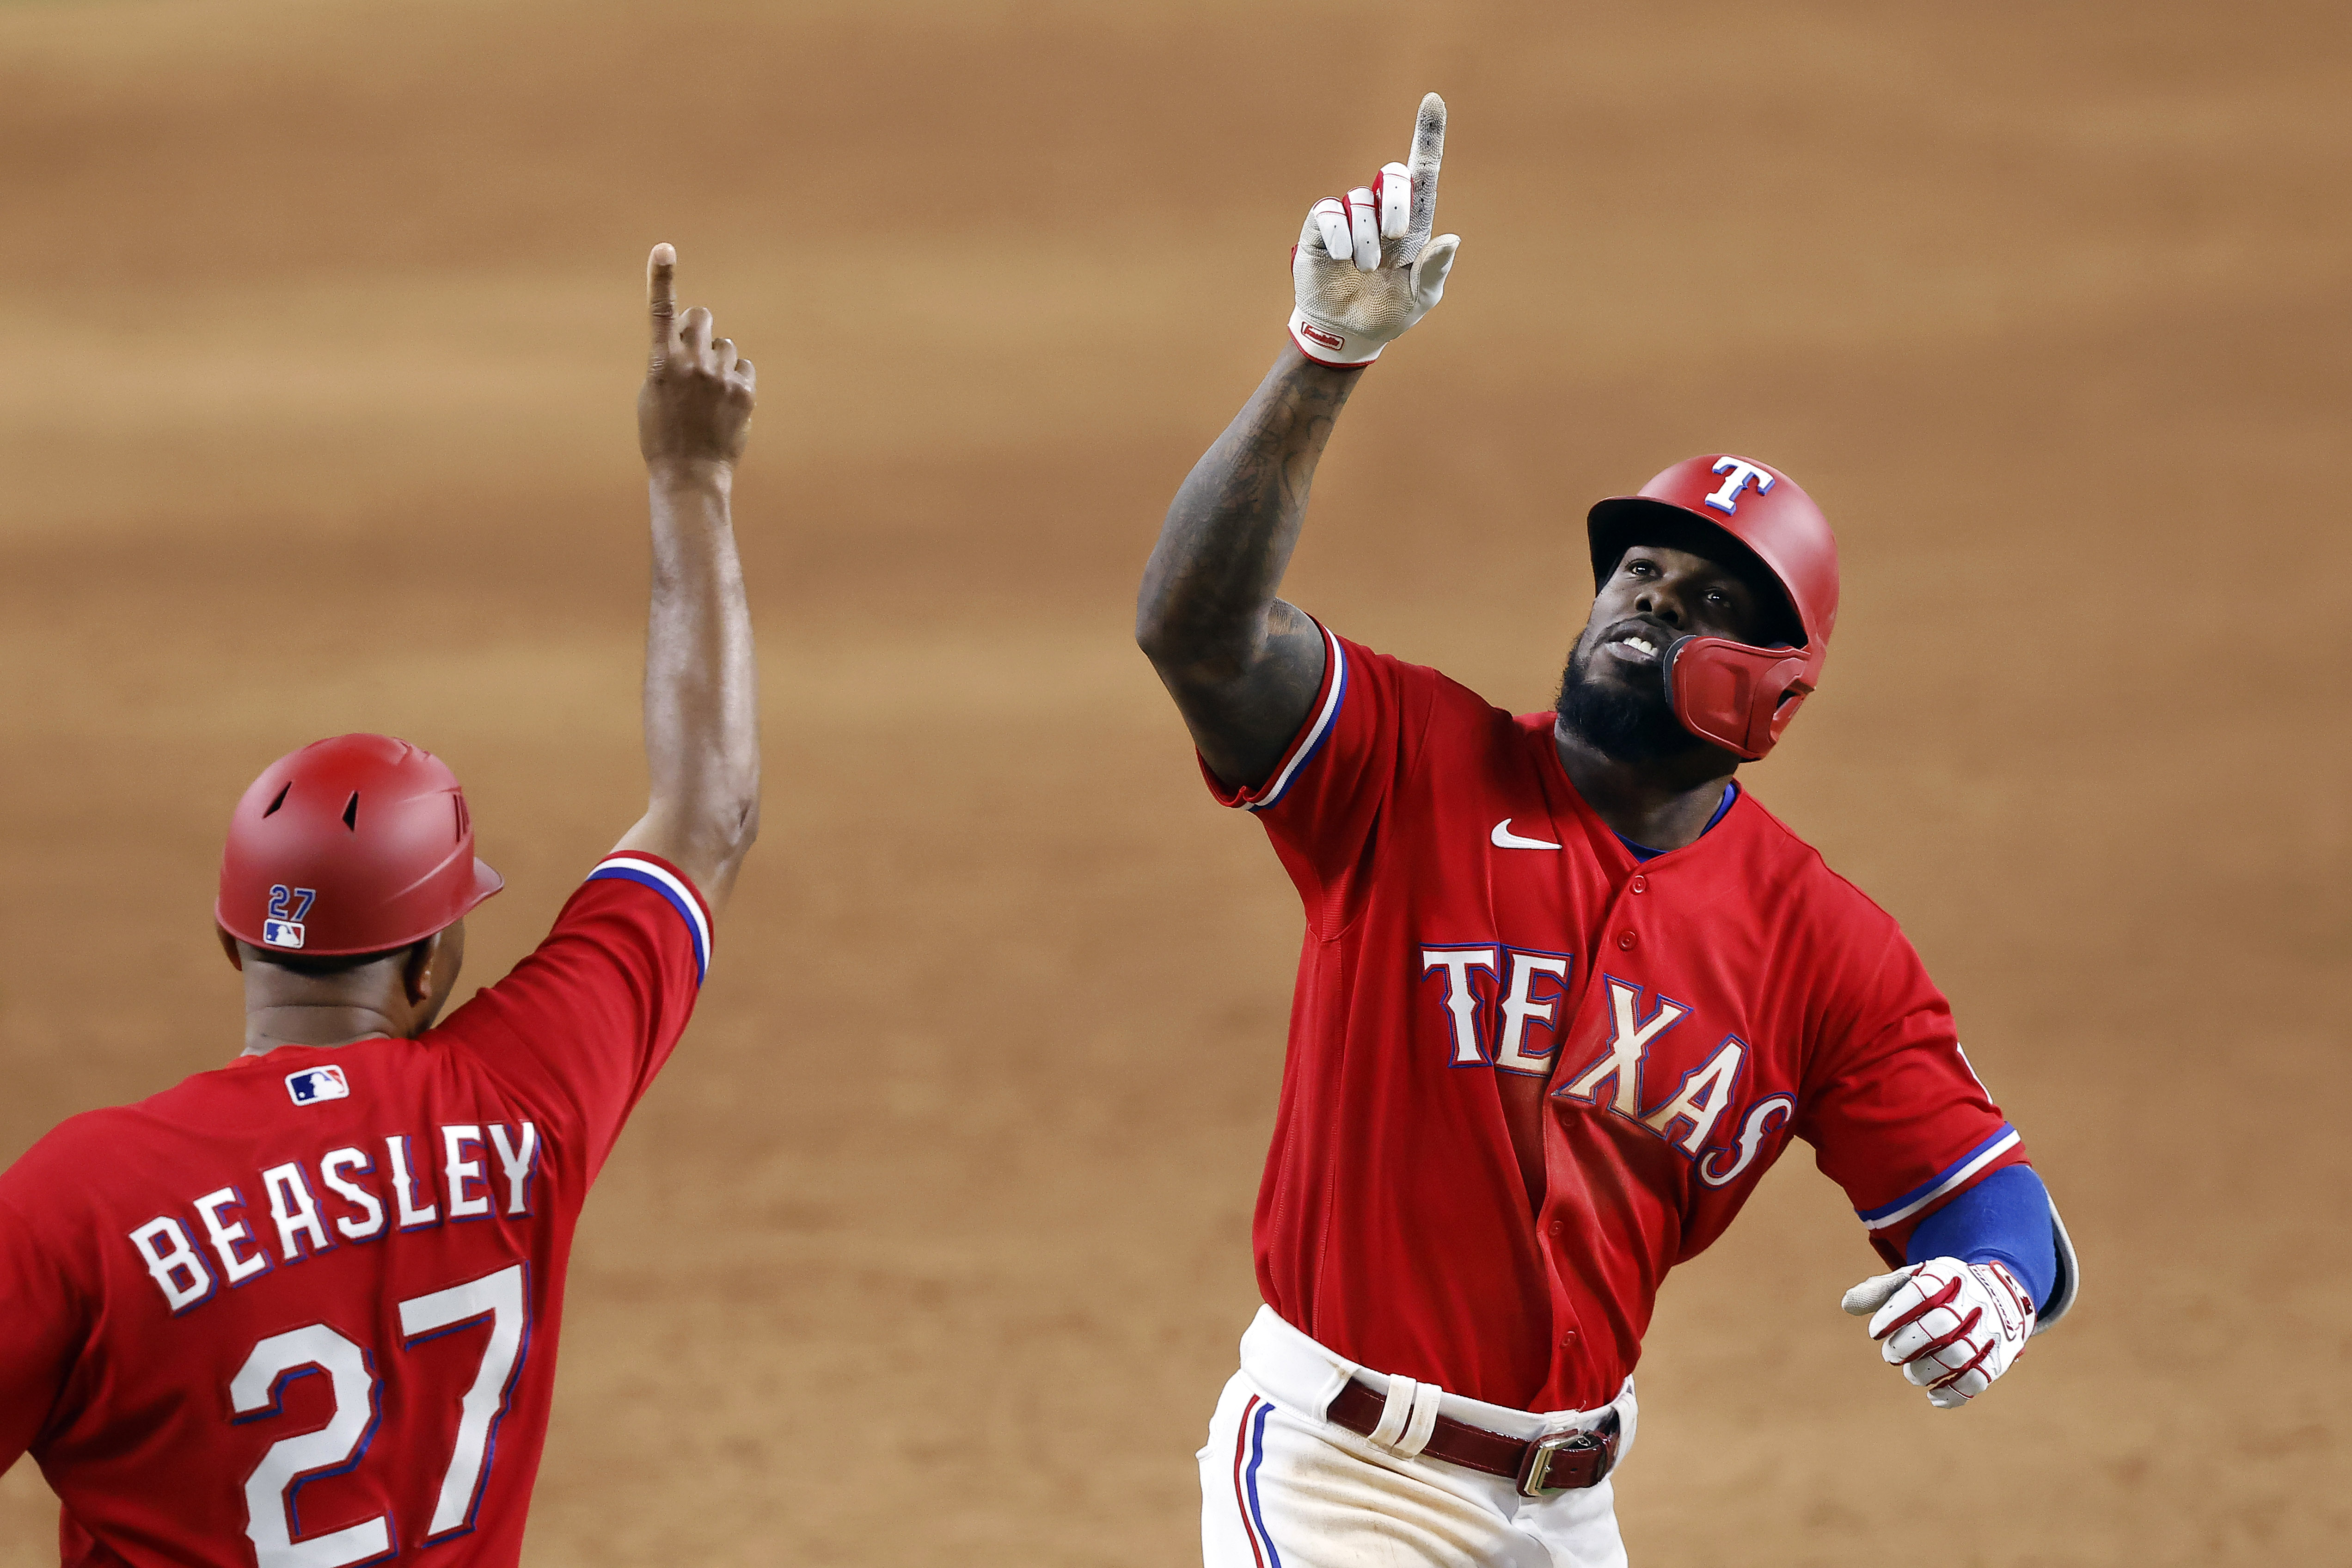 Adolis Garcia's extra-inning walk-off homer saved Rangers from what would  have been a soul crushing loss